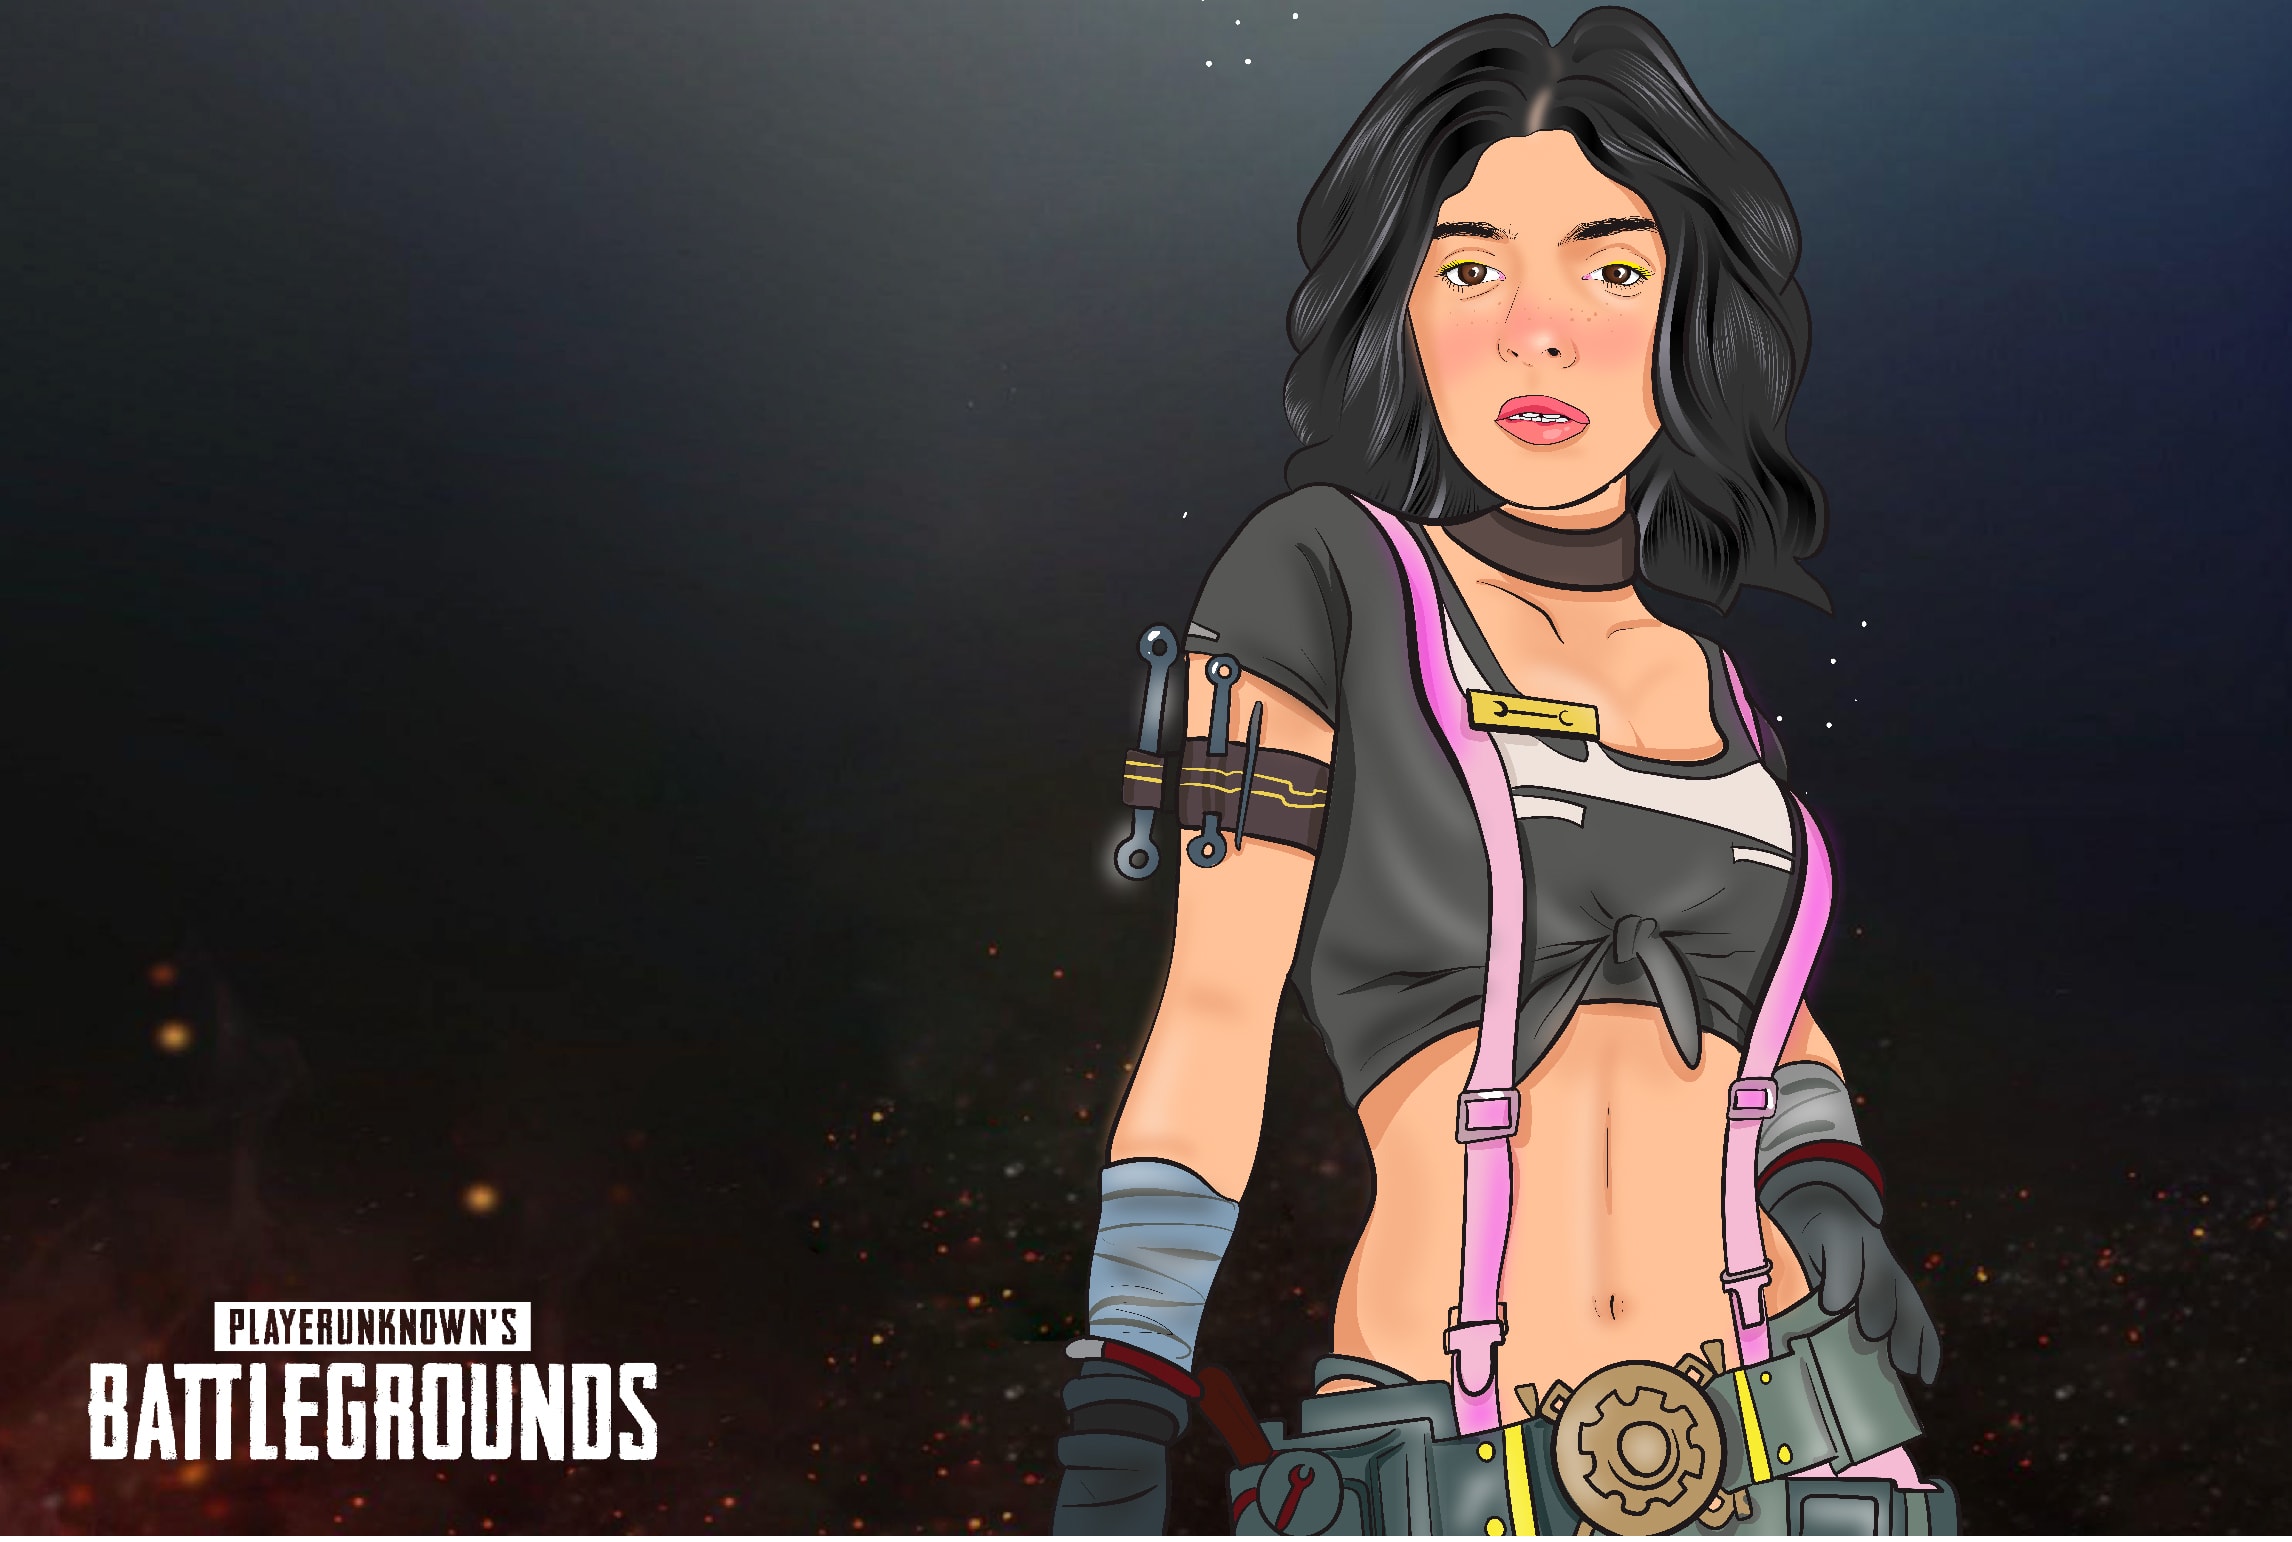 Turn your picture into a pubg cartoon illustration by Zainab1995 | Fiverr